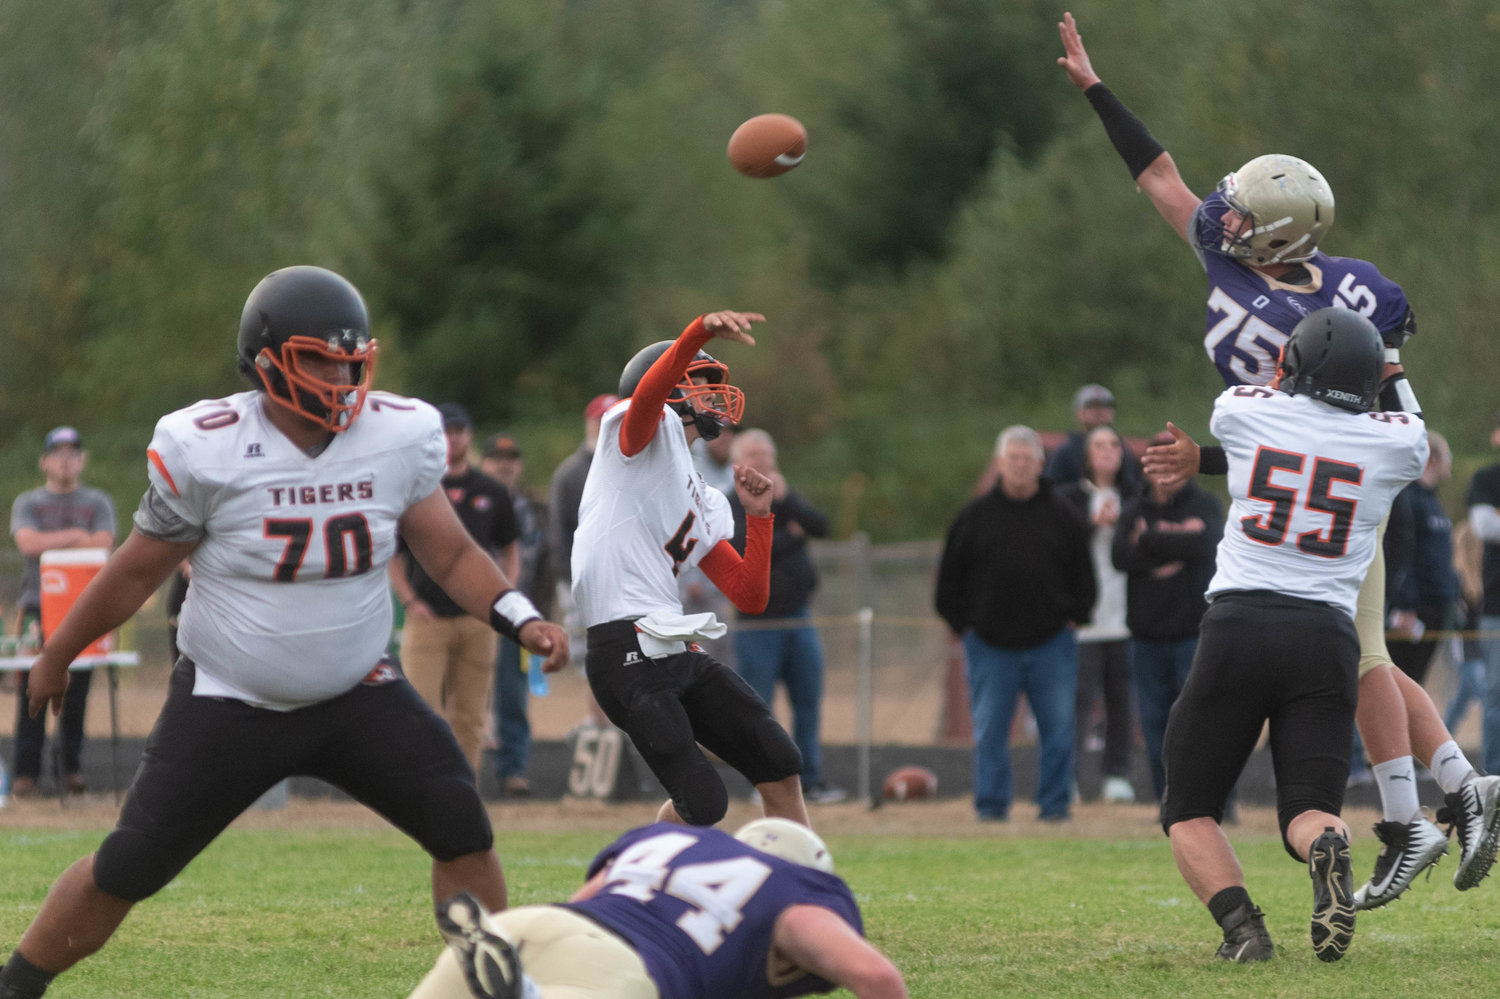 Sophomore Napavine quarterback Ashton Demarest lobs a pass over the outstretched arms of a defender in the Tigers 34-20 win over Onalaska Friday night.